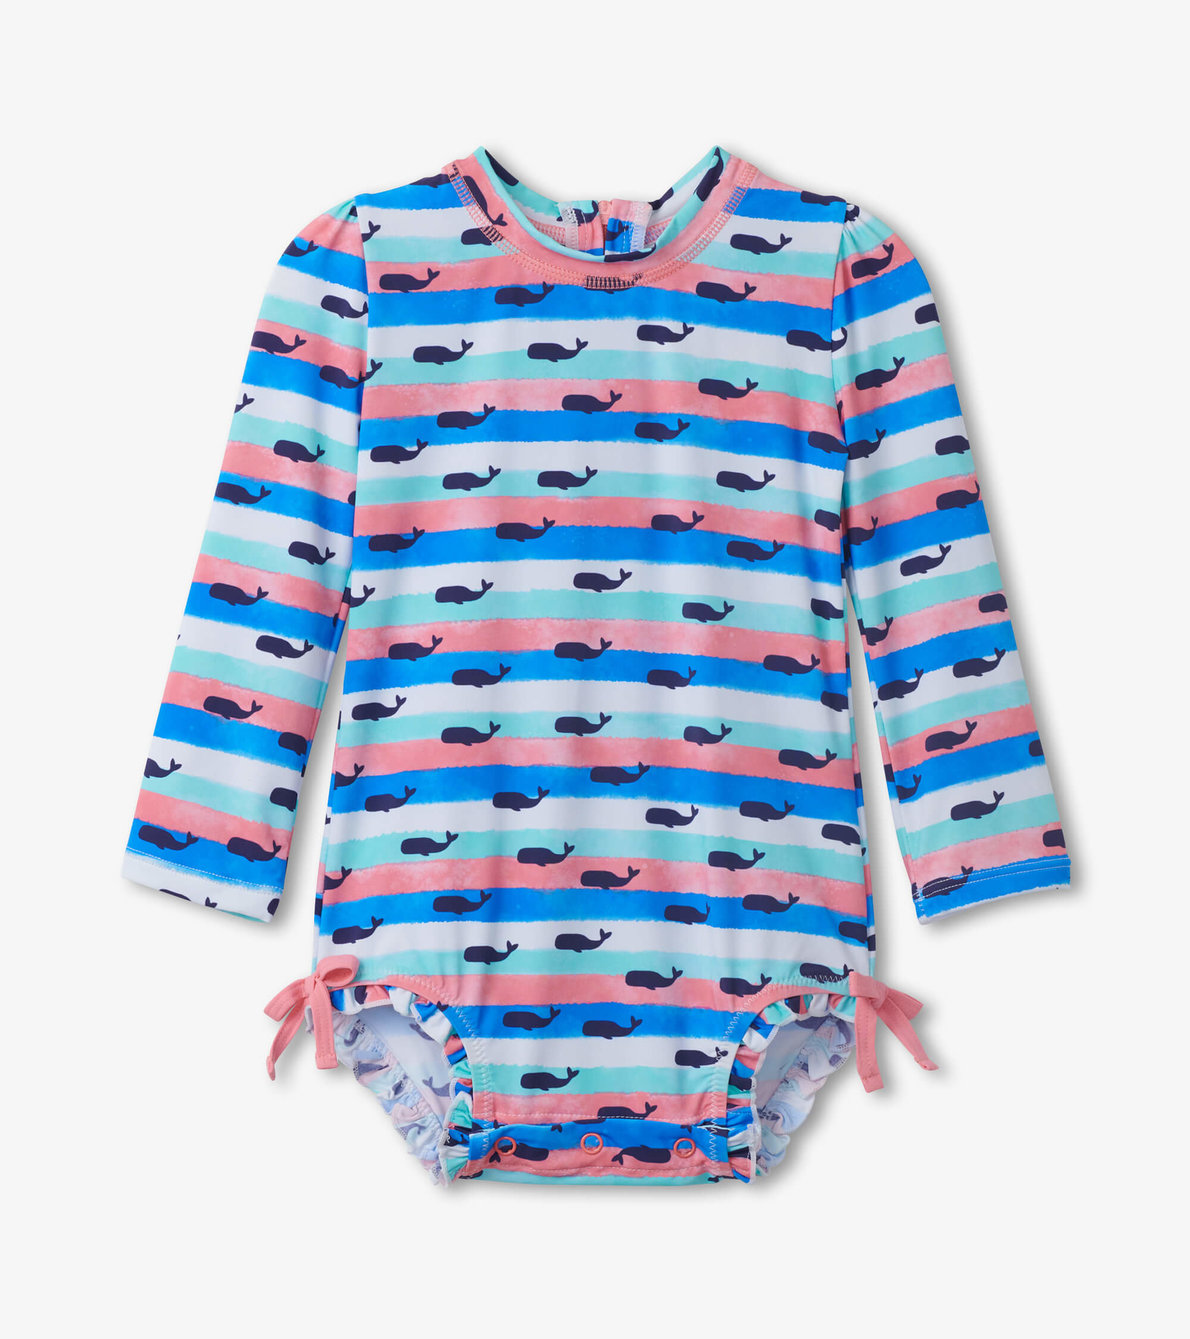 View larger image of Nautical Whales Baby Rashguard Swimsuit